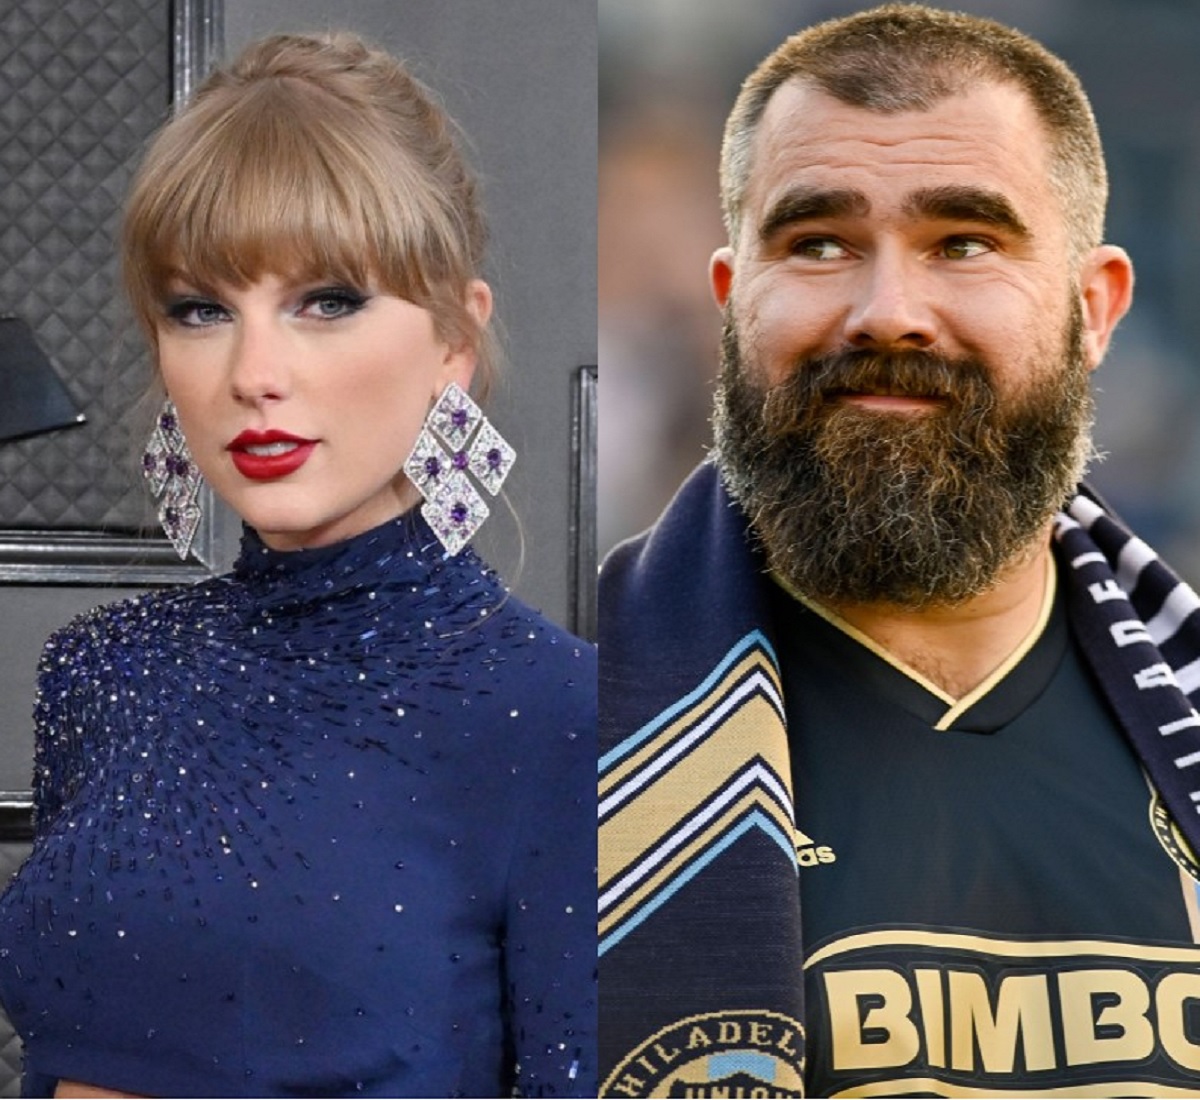 Jason Kelce remarked that Taylor Swift, one of the most famous women in the world, has been captivated by Travis Kelce. He expressed a wish that Travis Kelce seizes the opportunity and doesn’t waste any time in marrying her.